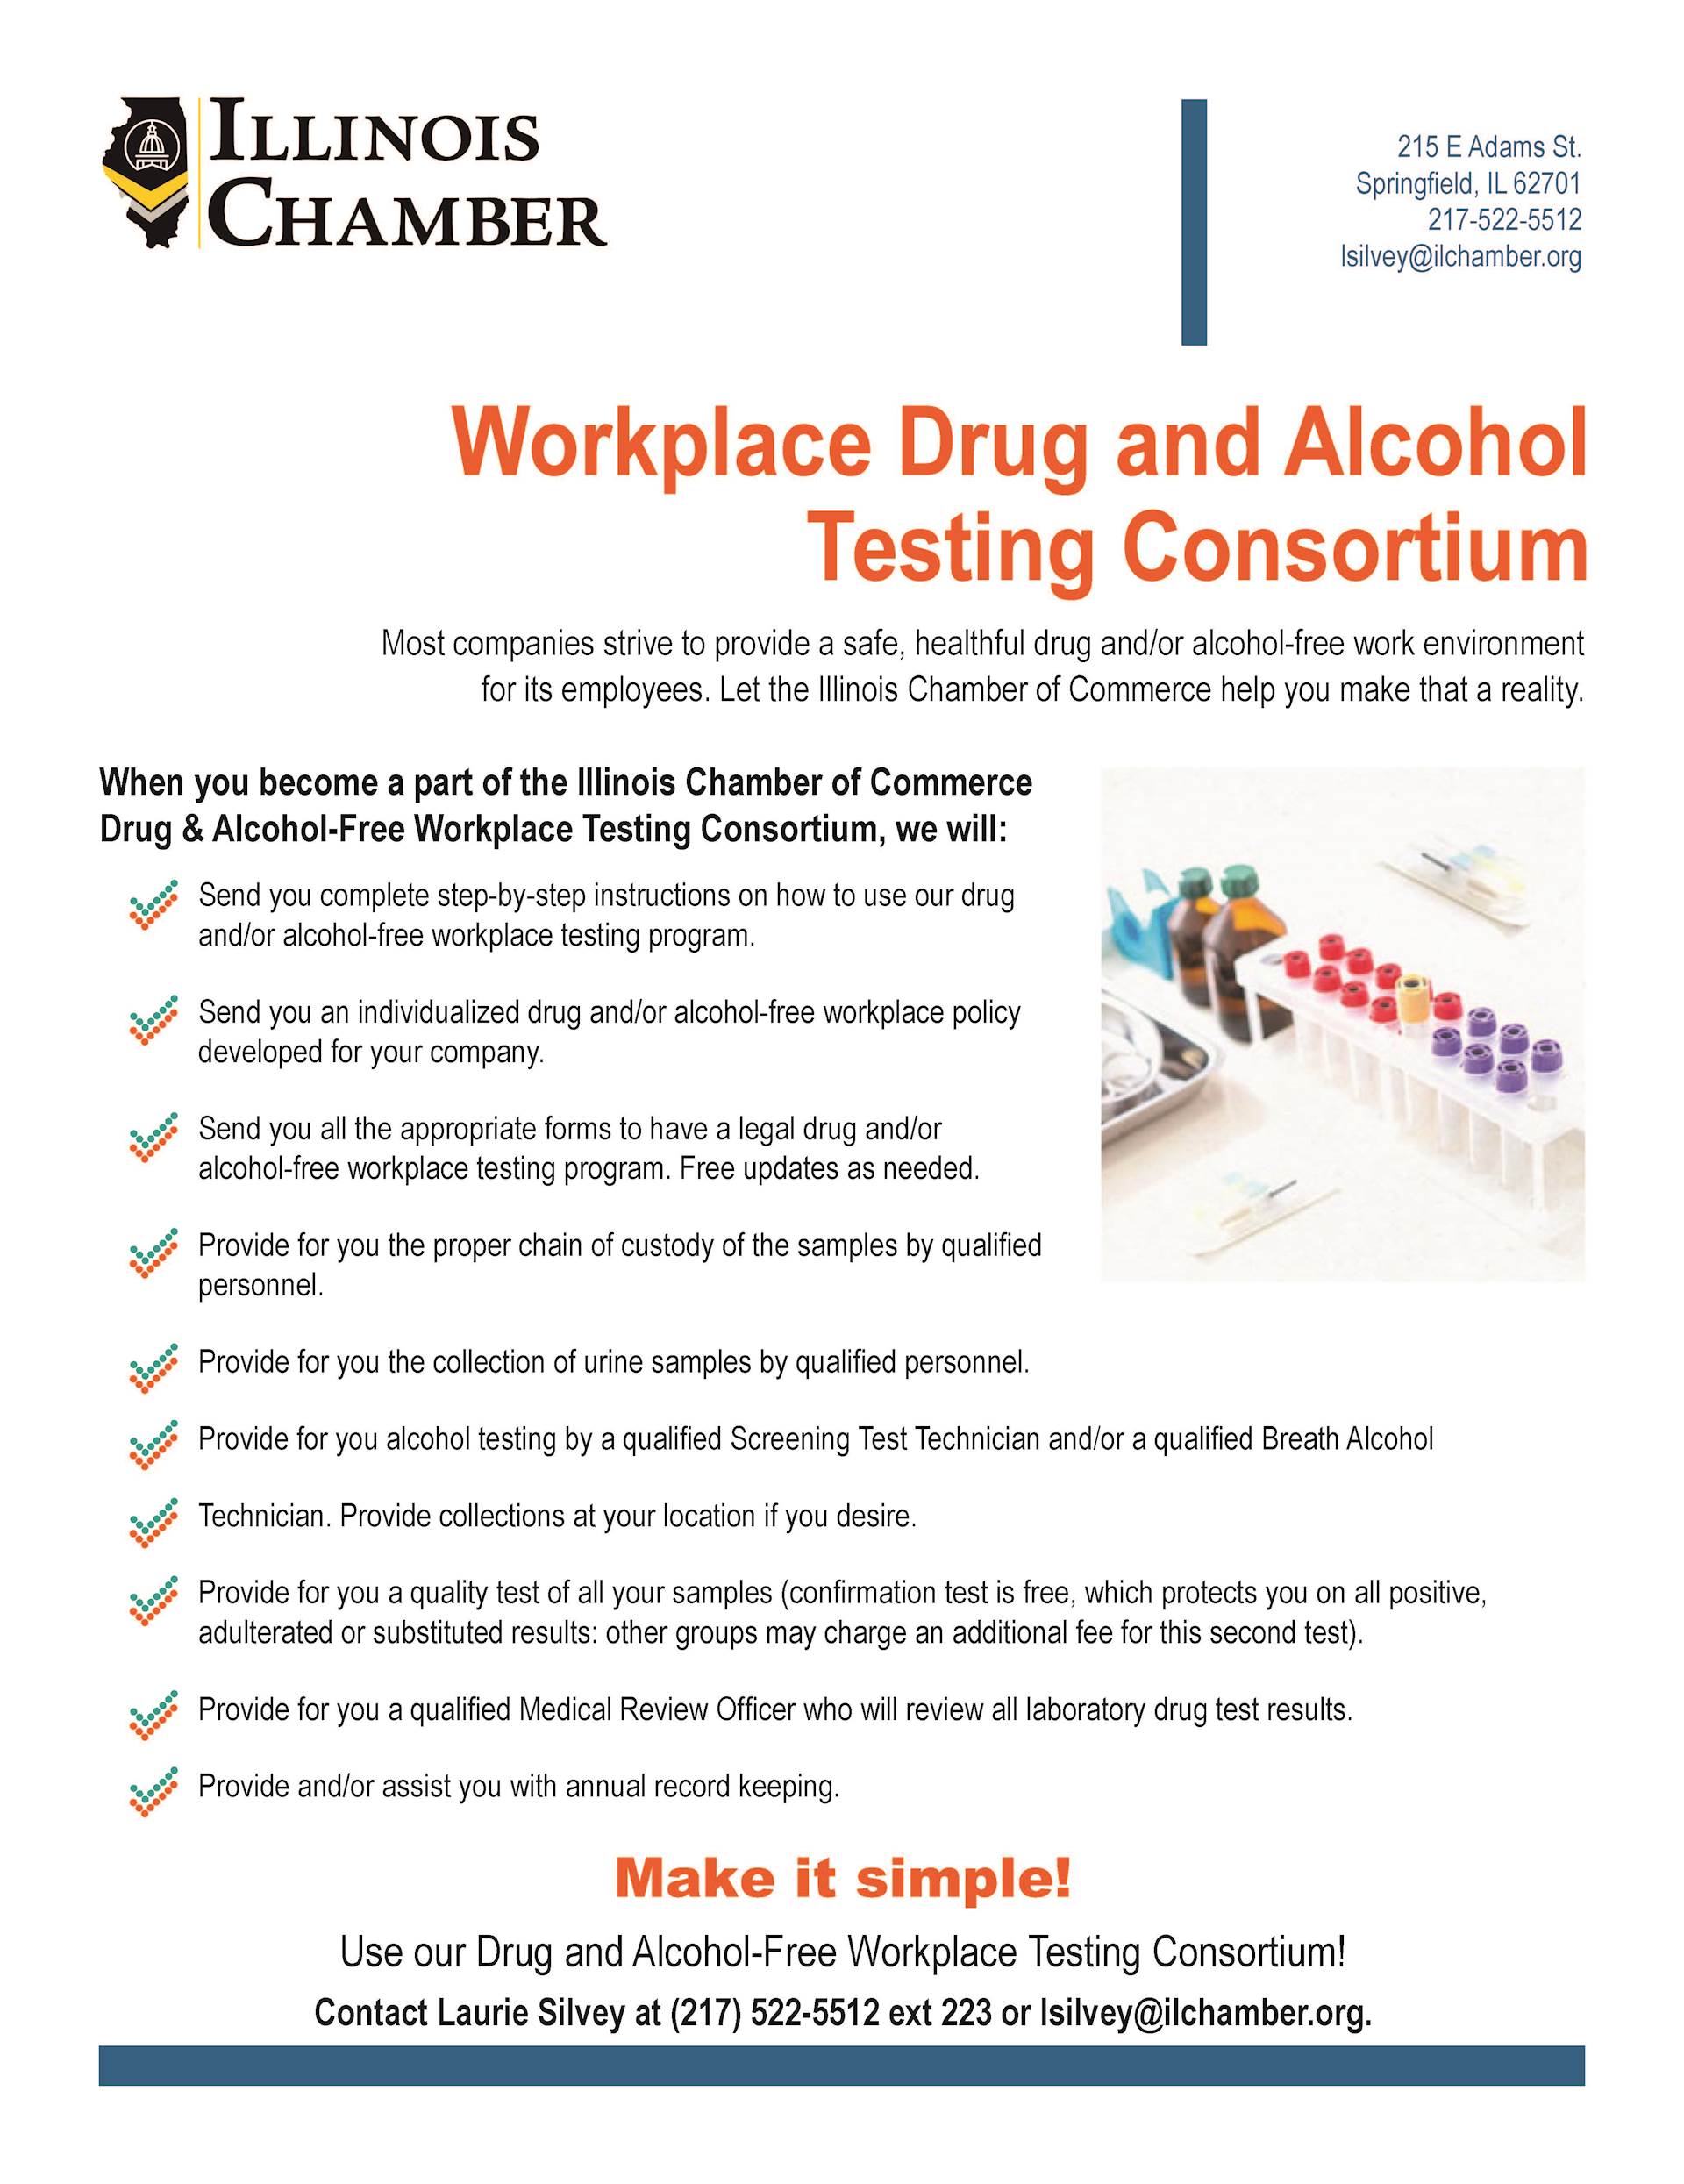 IL Chamber s Workplace Drug and Alcohol Testing Consortium